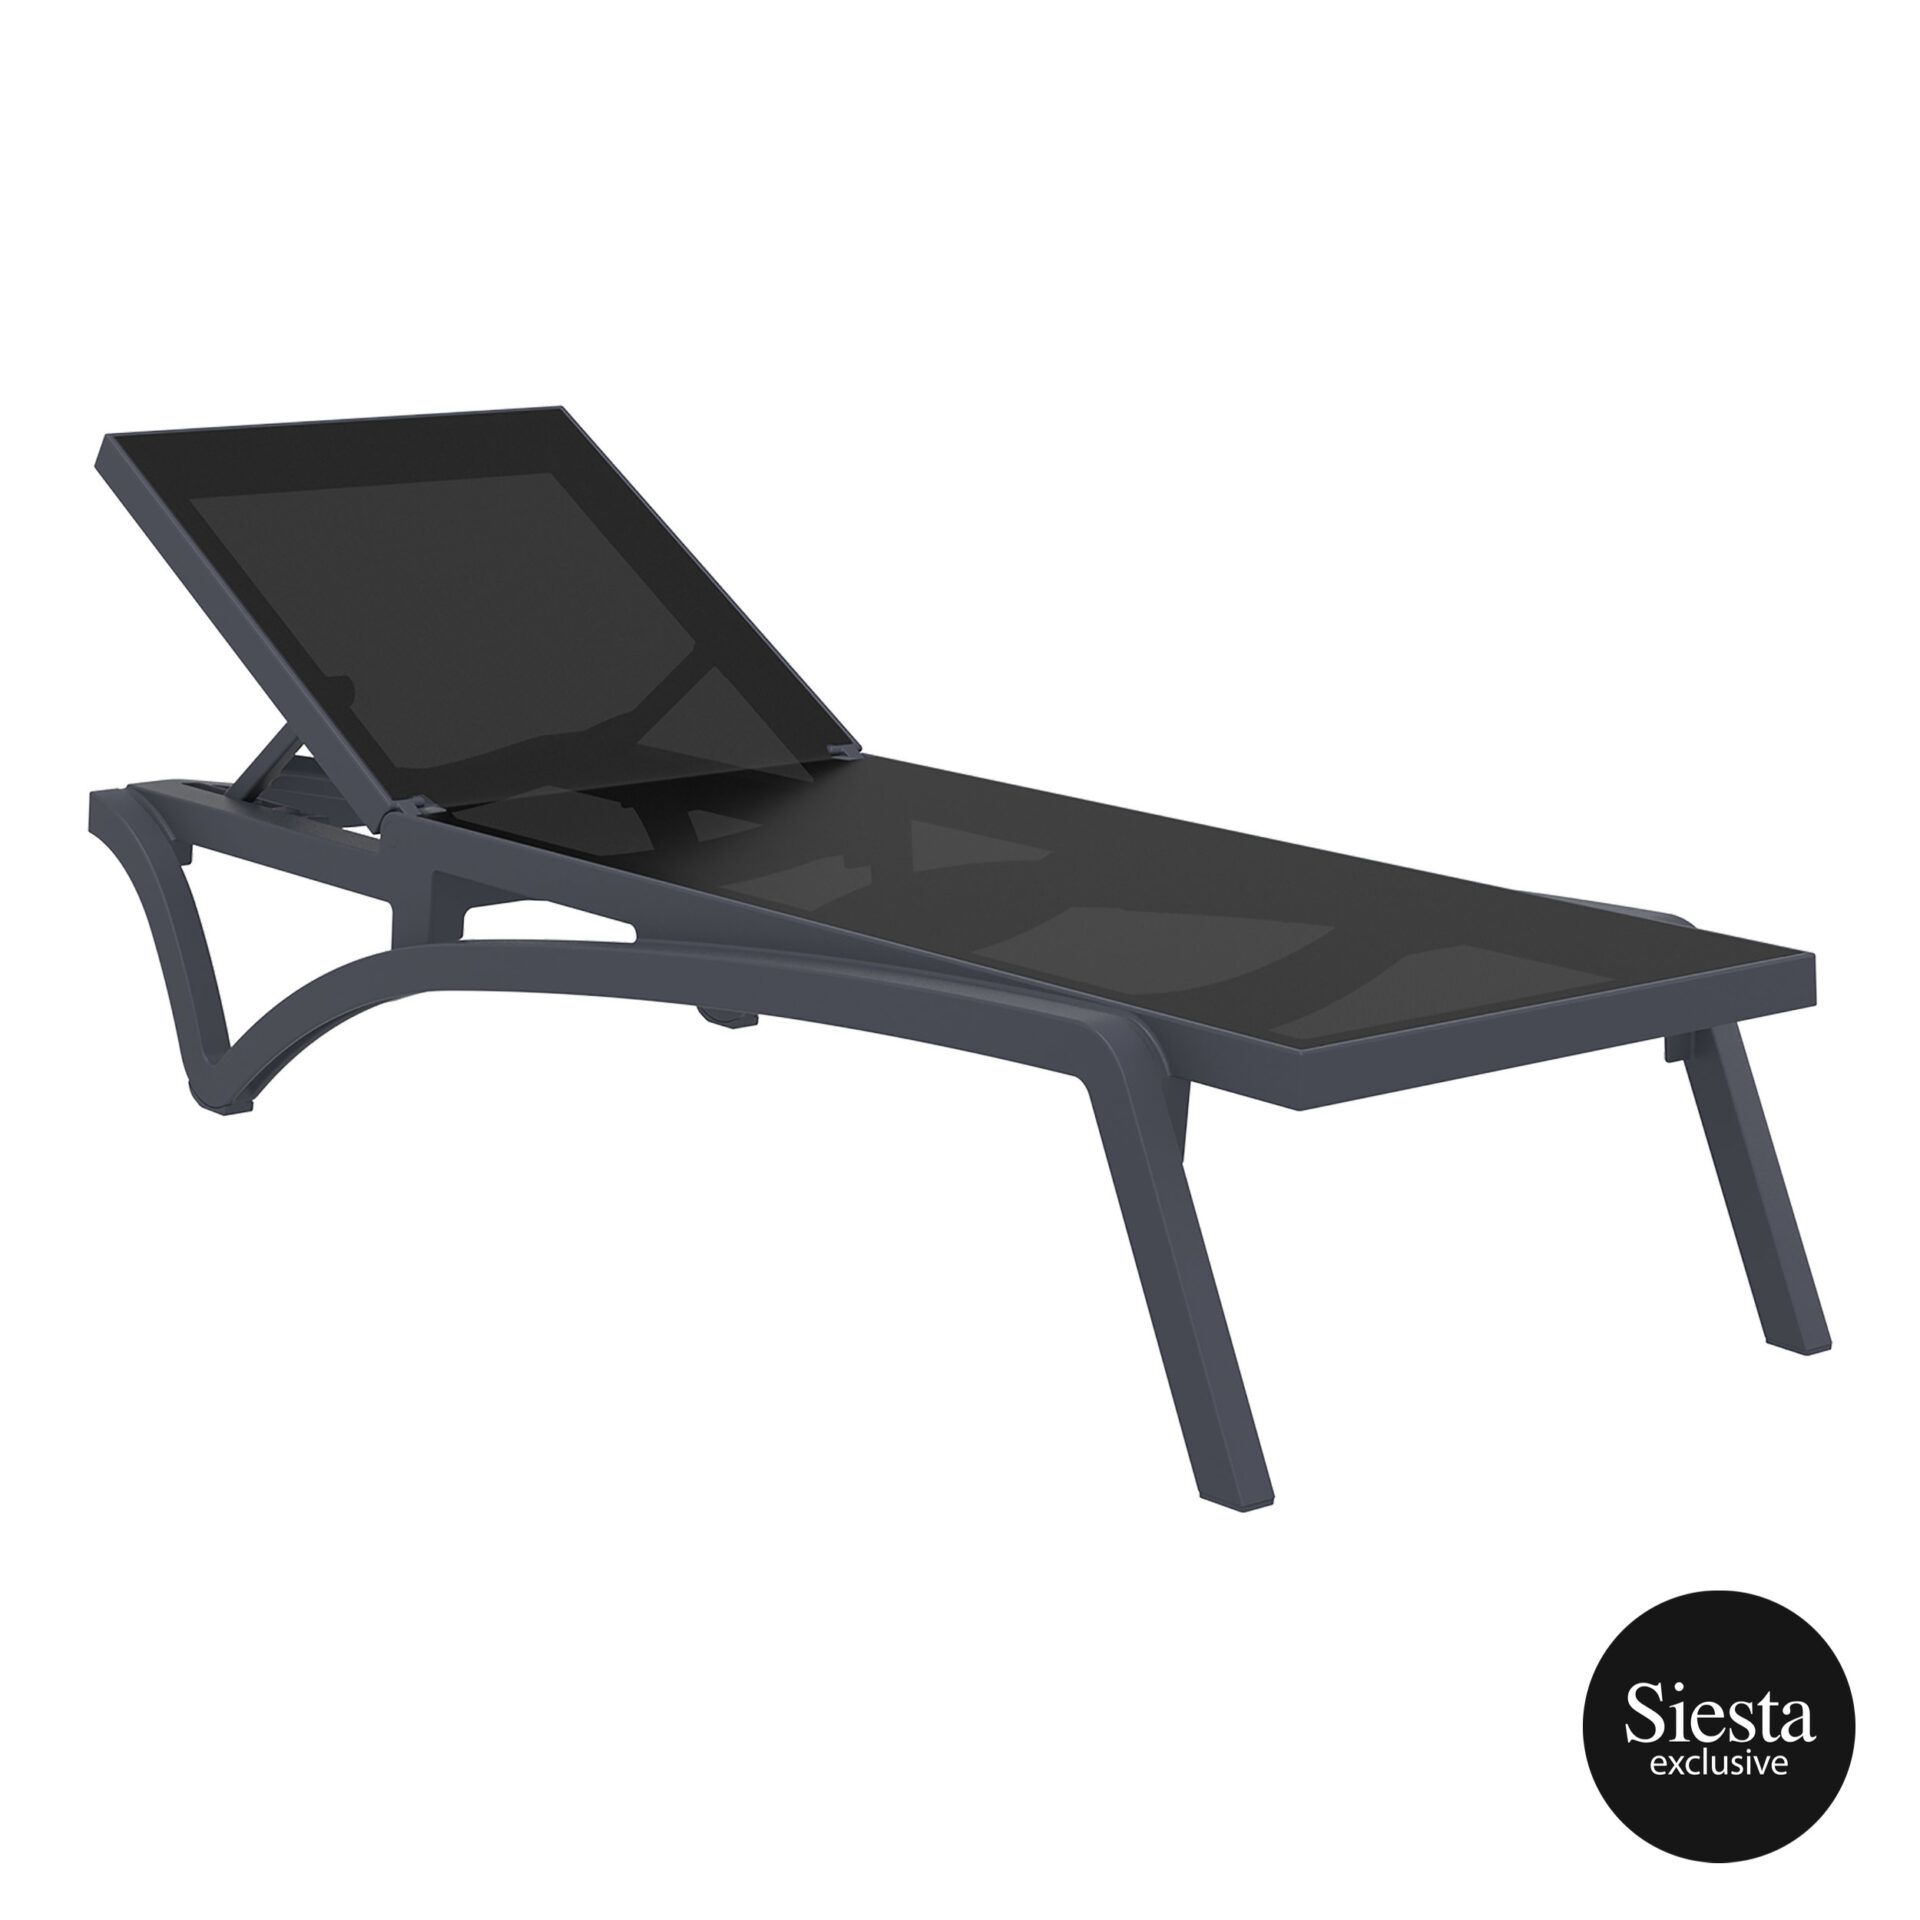 pool deck commercial pacific sunlounger darkgrey black front side